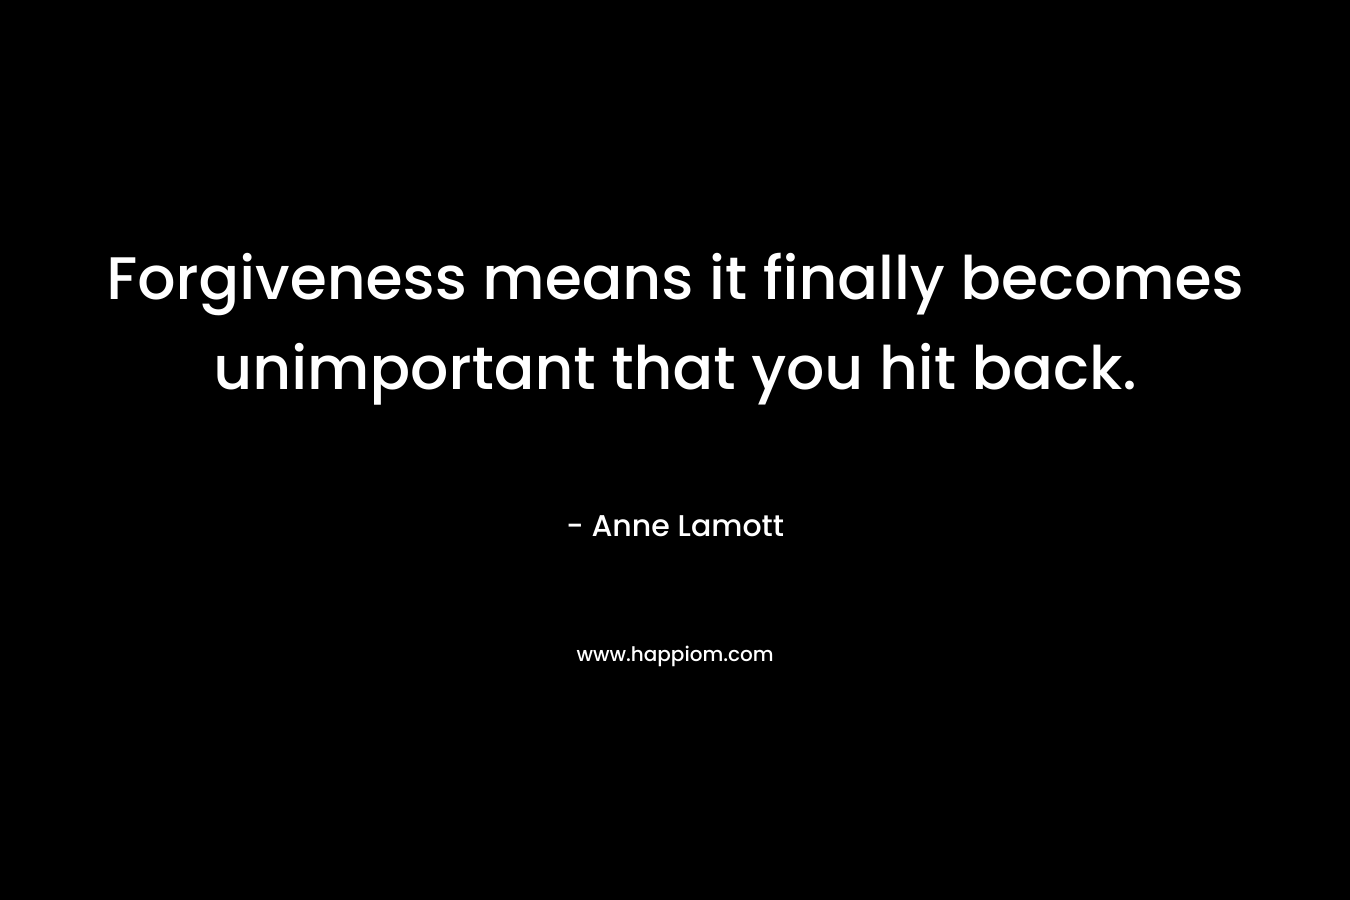 Forgiveness means it finally becomes unimportant that you hit back. – Anne Lamott